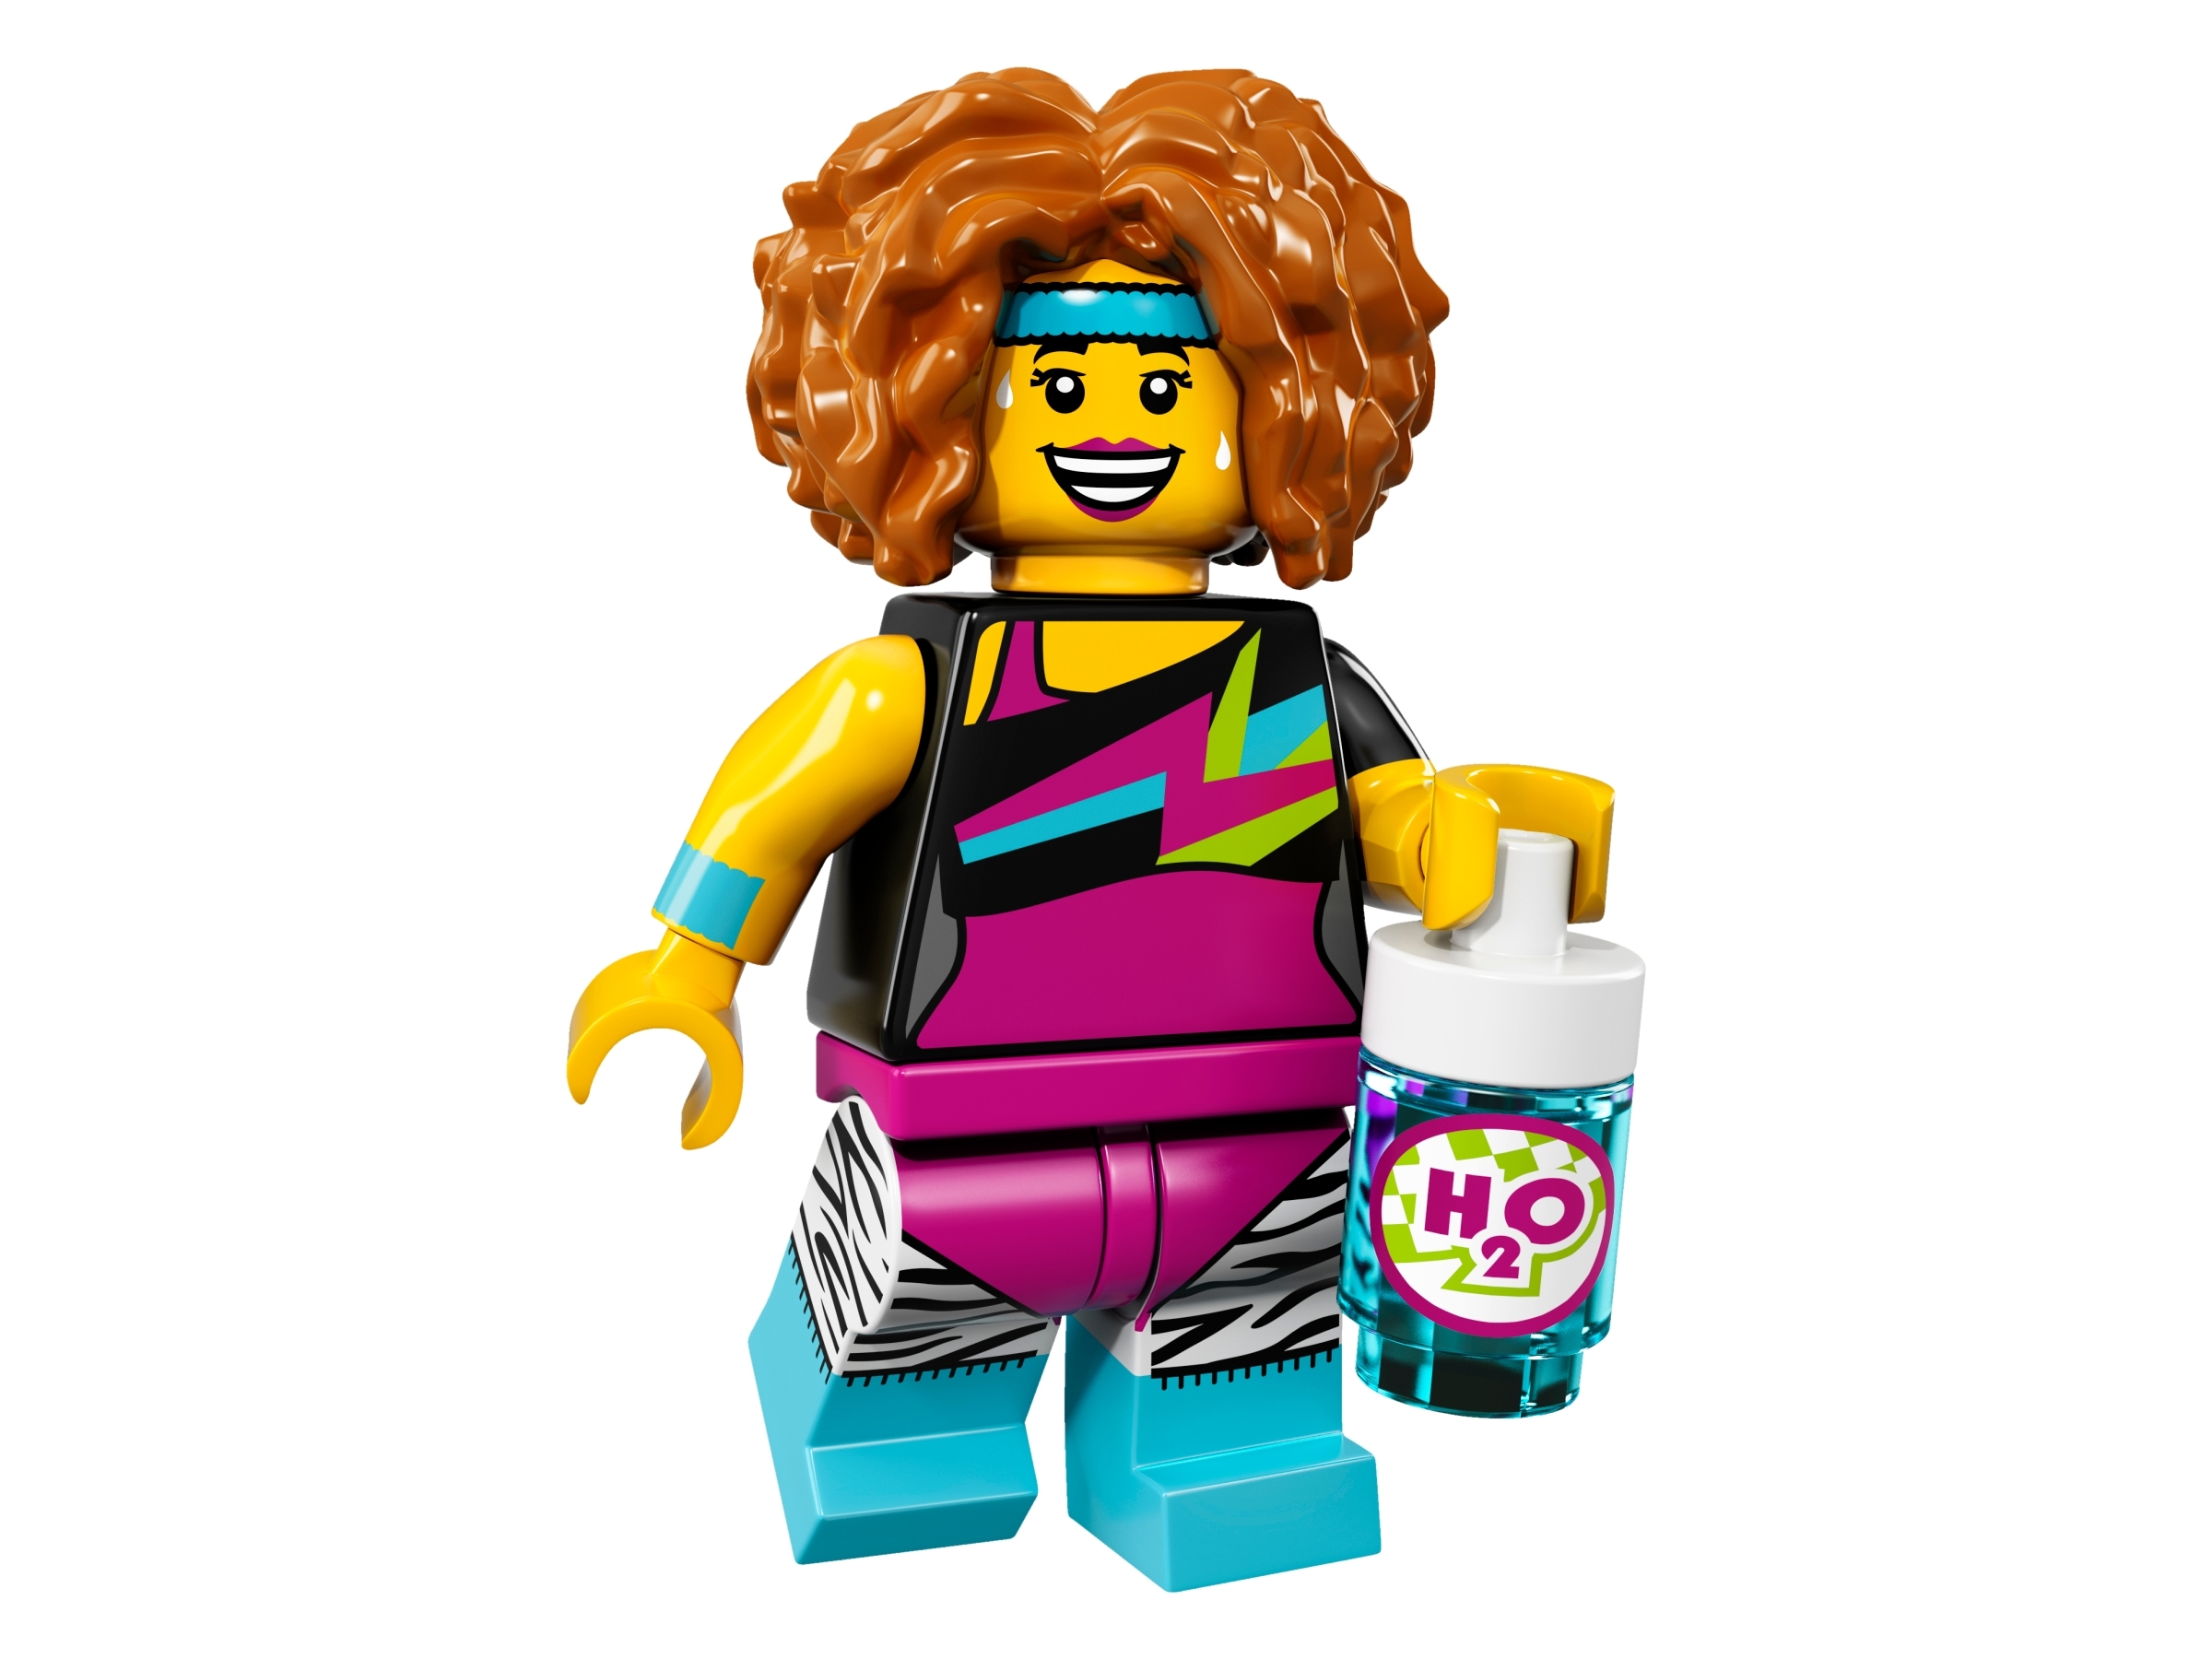 LEGO 71018 Minifigures Series 17 for sale online.